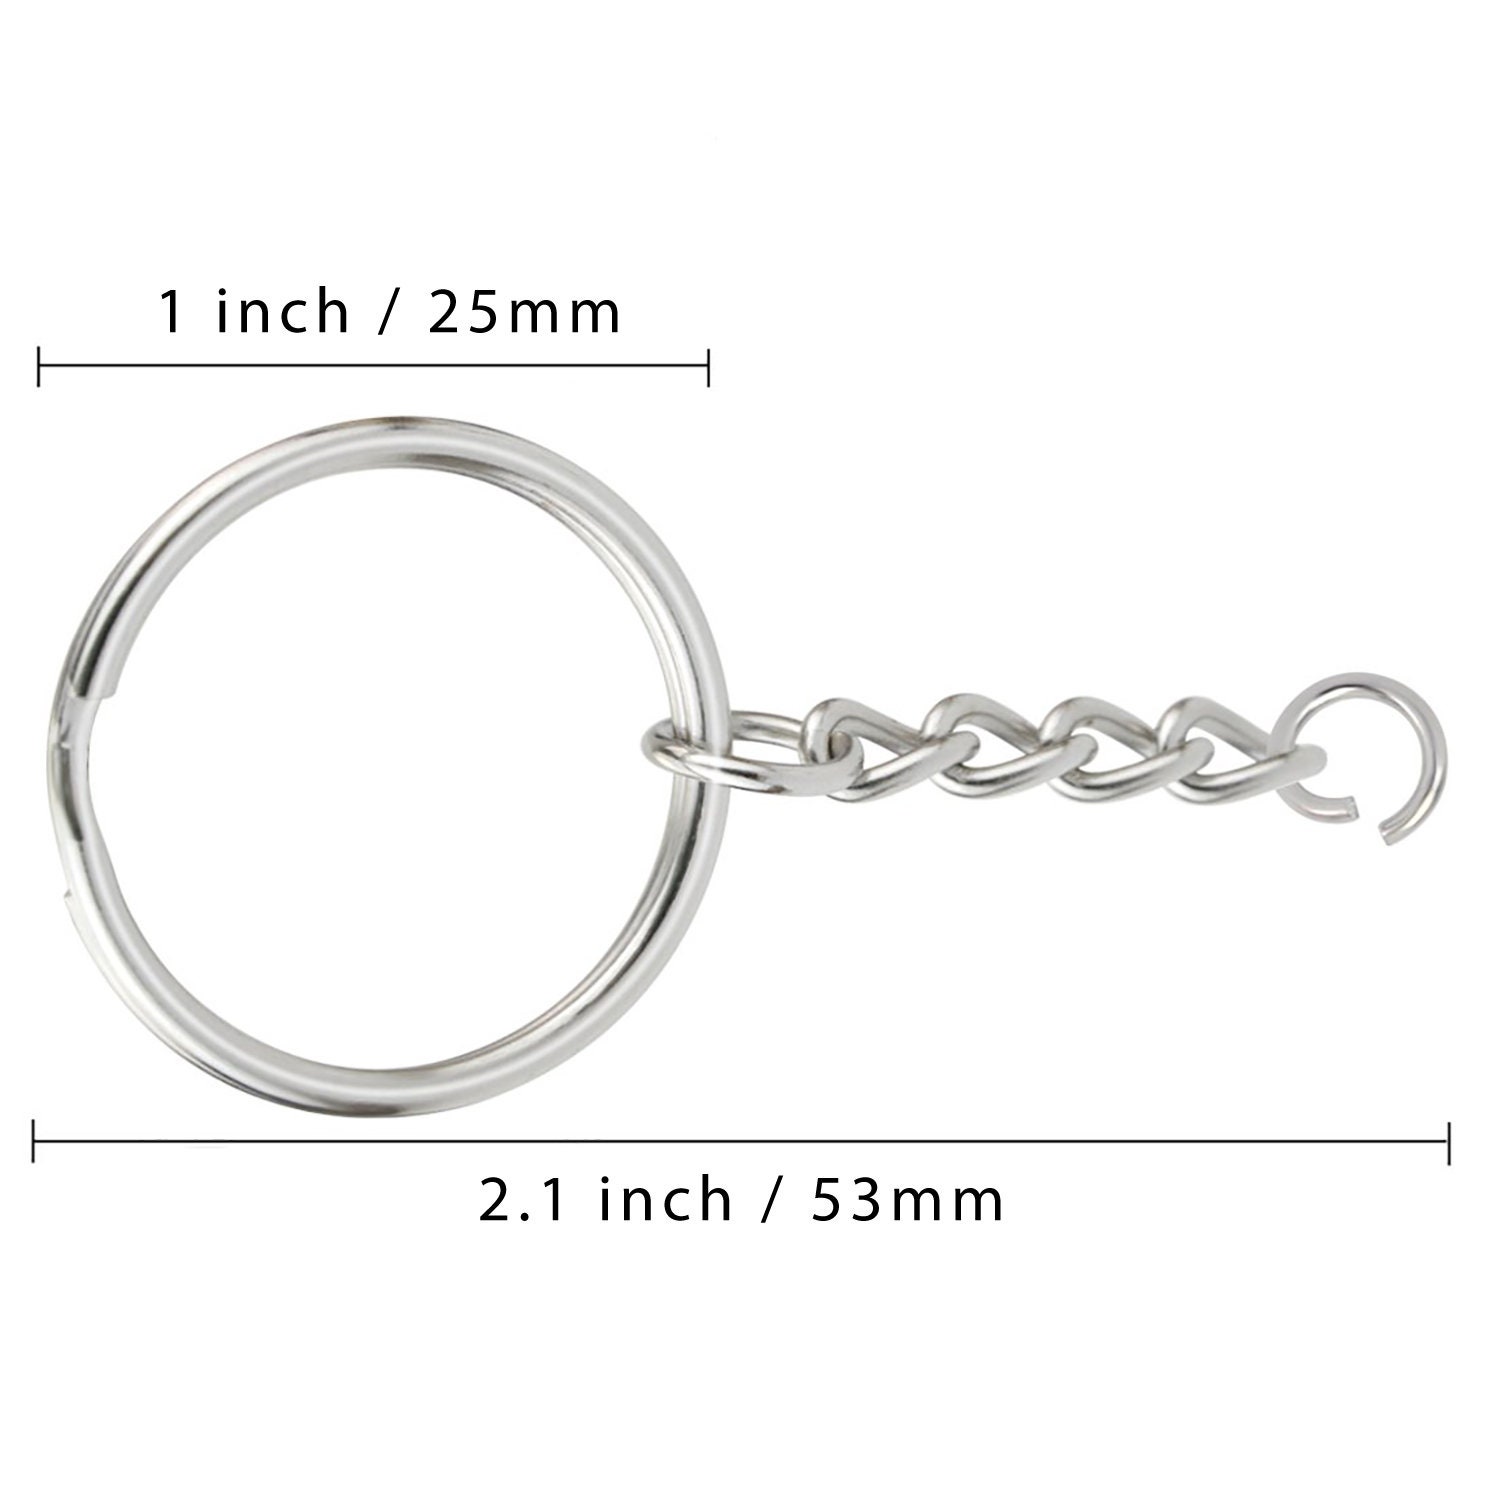 Eboot 10 mm 50 Pieces Small Key Chain Ring Split Rings Key Chains for Keys Organization, Silver Color